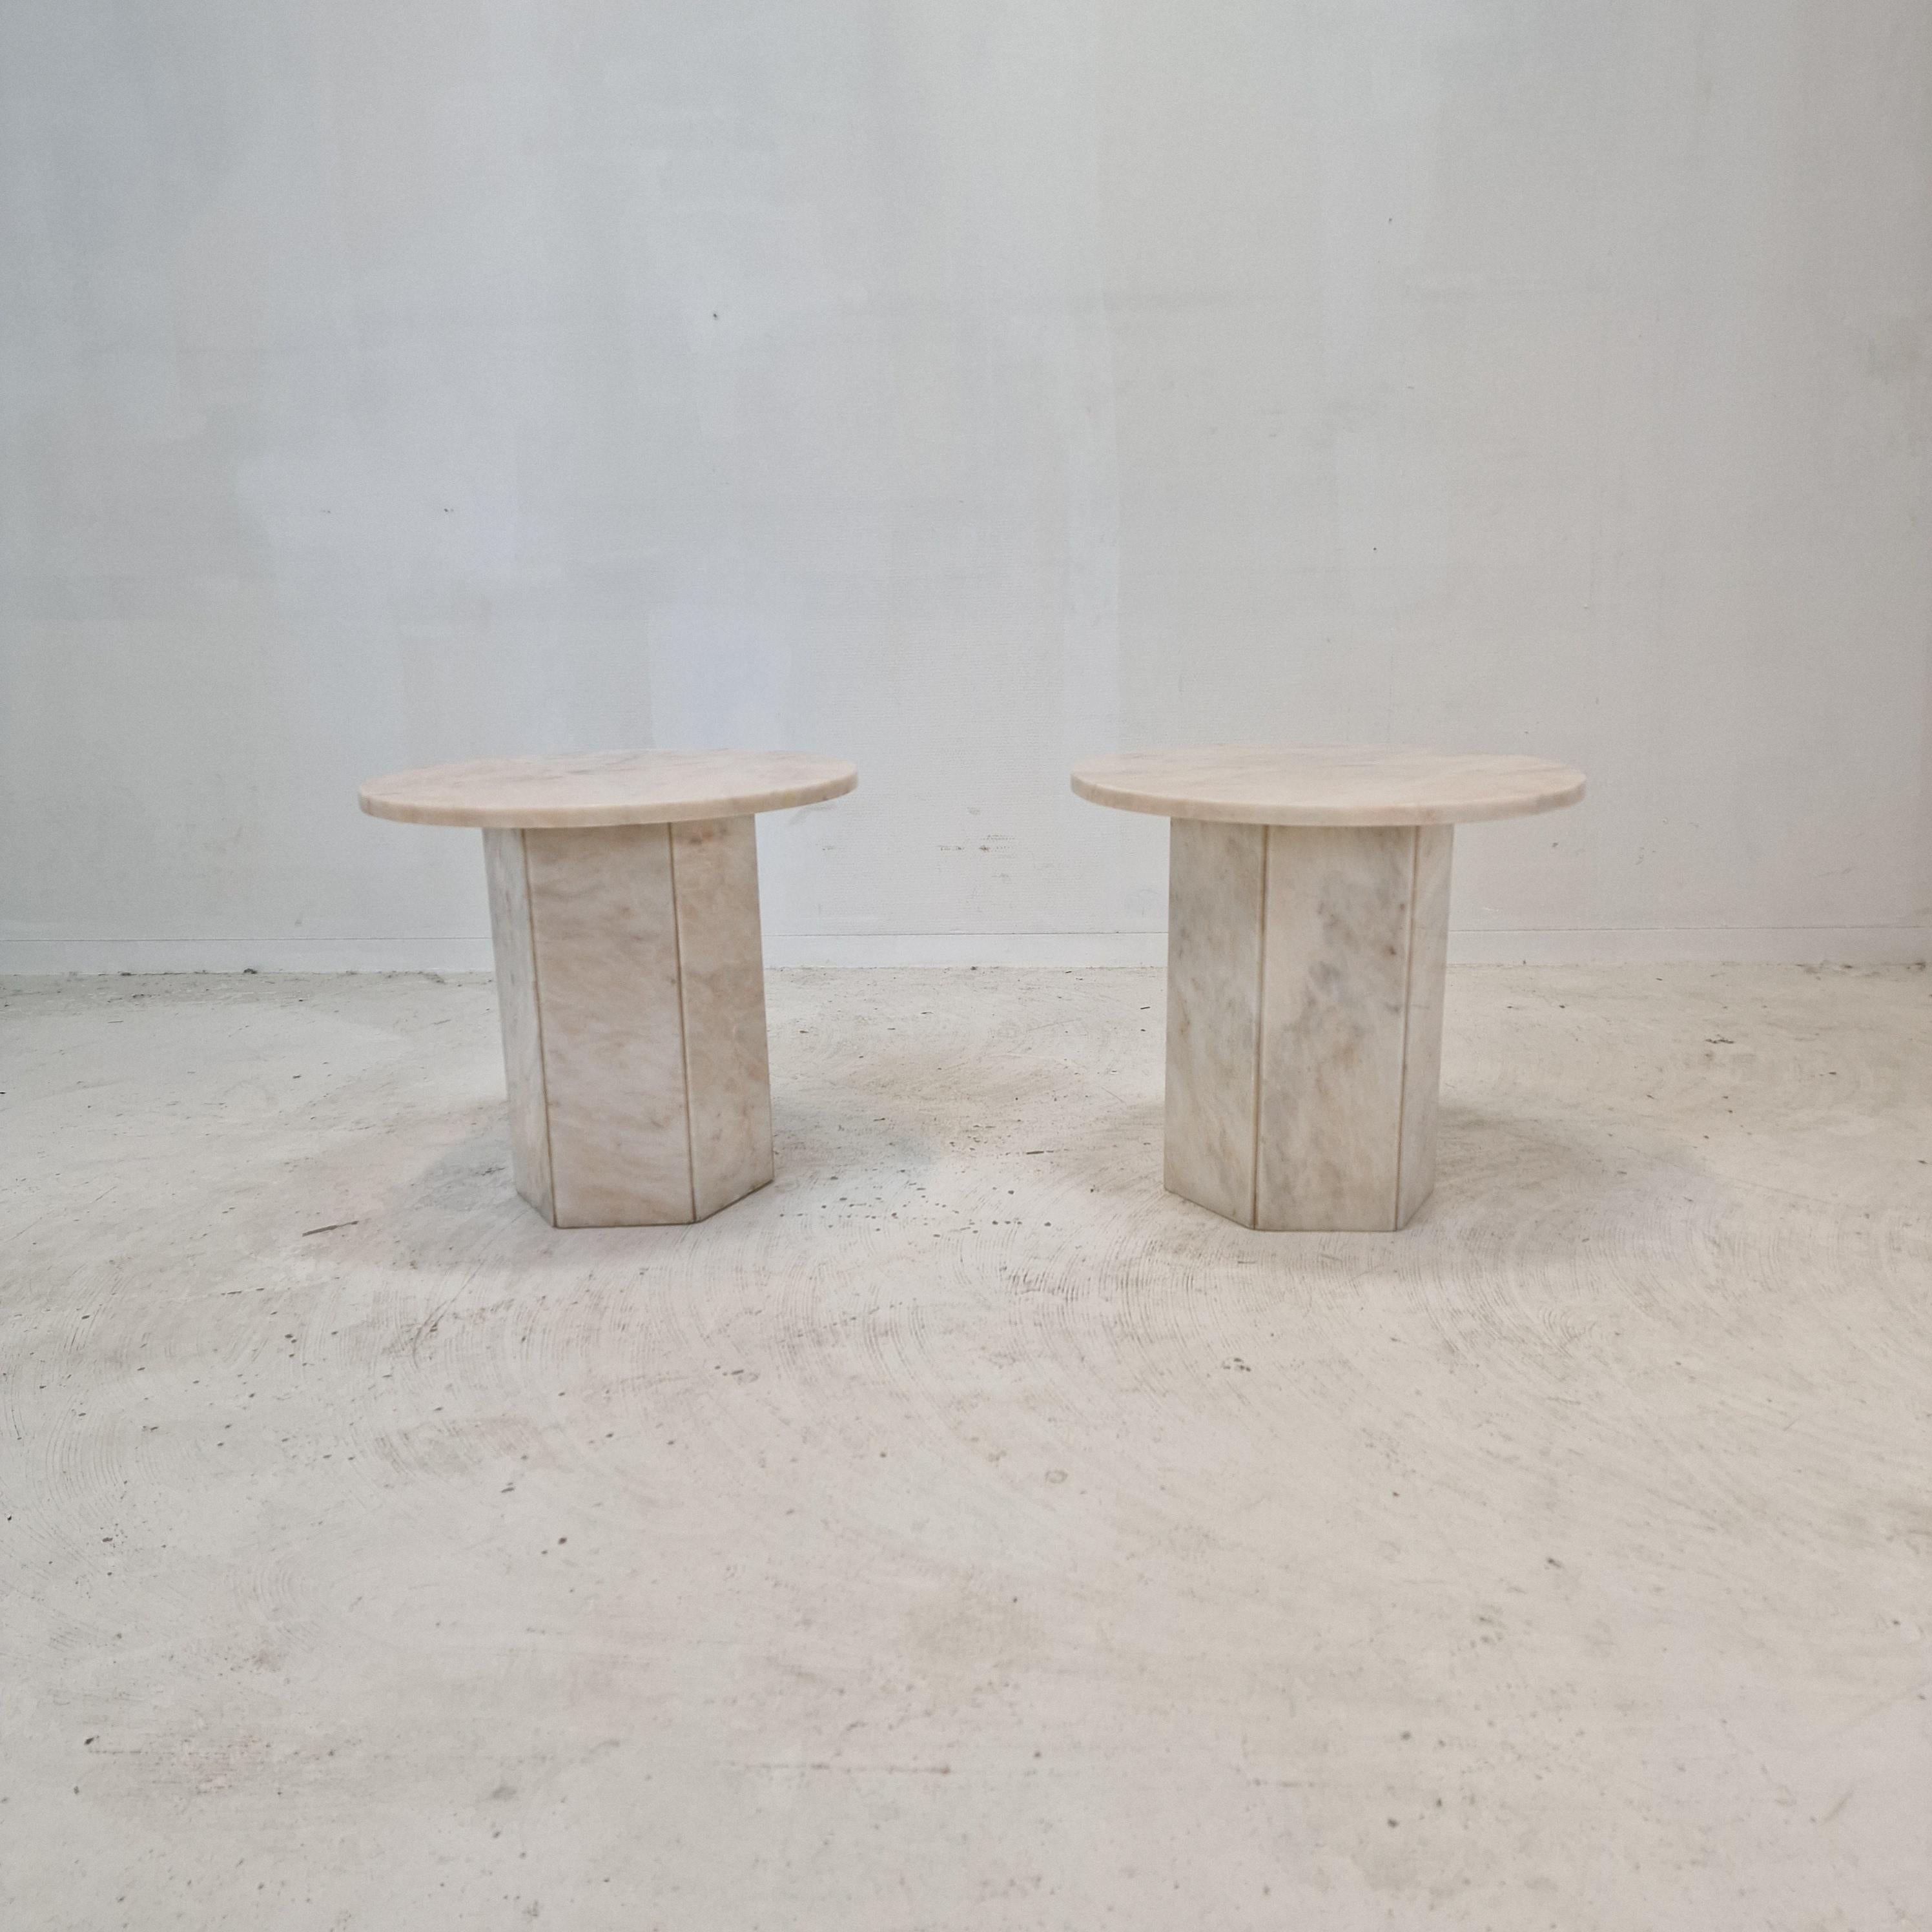 Very nice set of 2 Italian coffee tables or side tables, handcrafted out of marble. 
They can be used inside or outside the house.

Both tables have the same size.

The plate and the base are made of very nice marble.
Please take notice of the